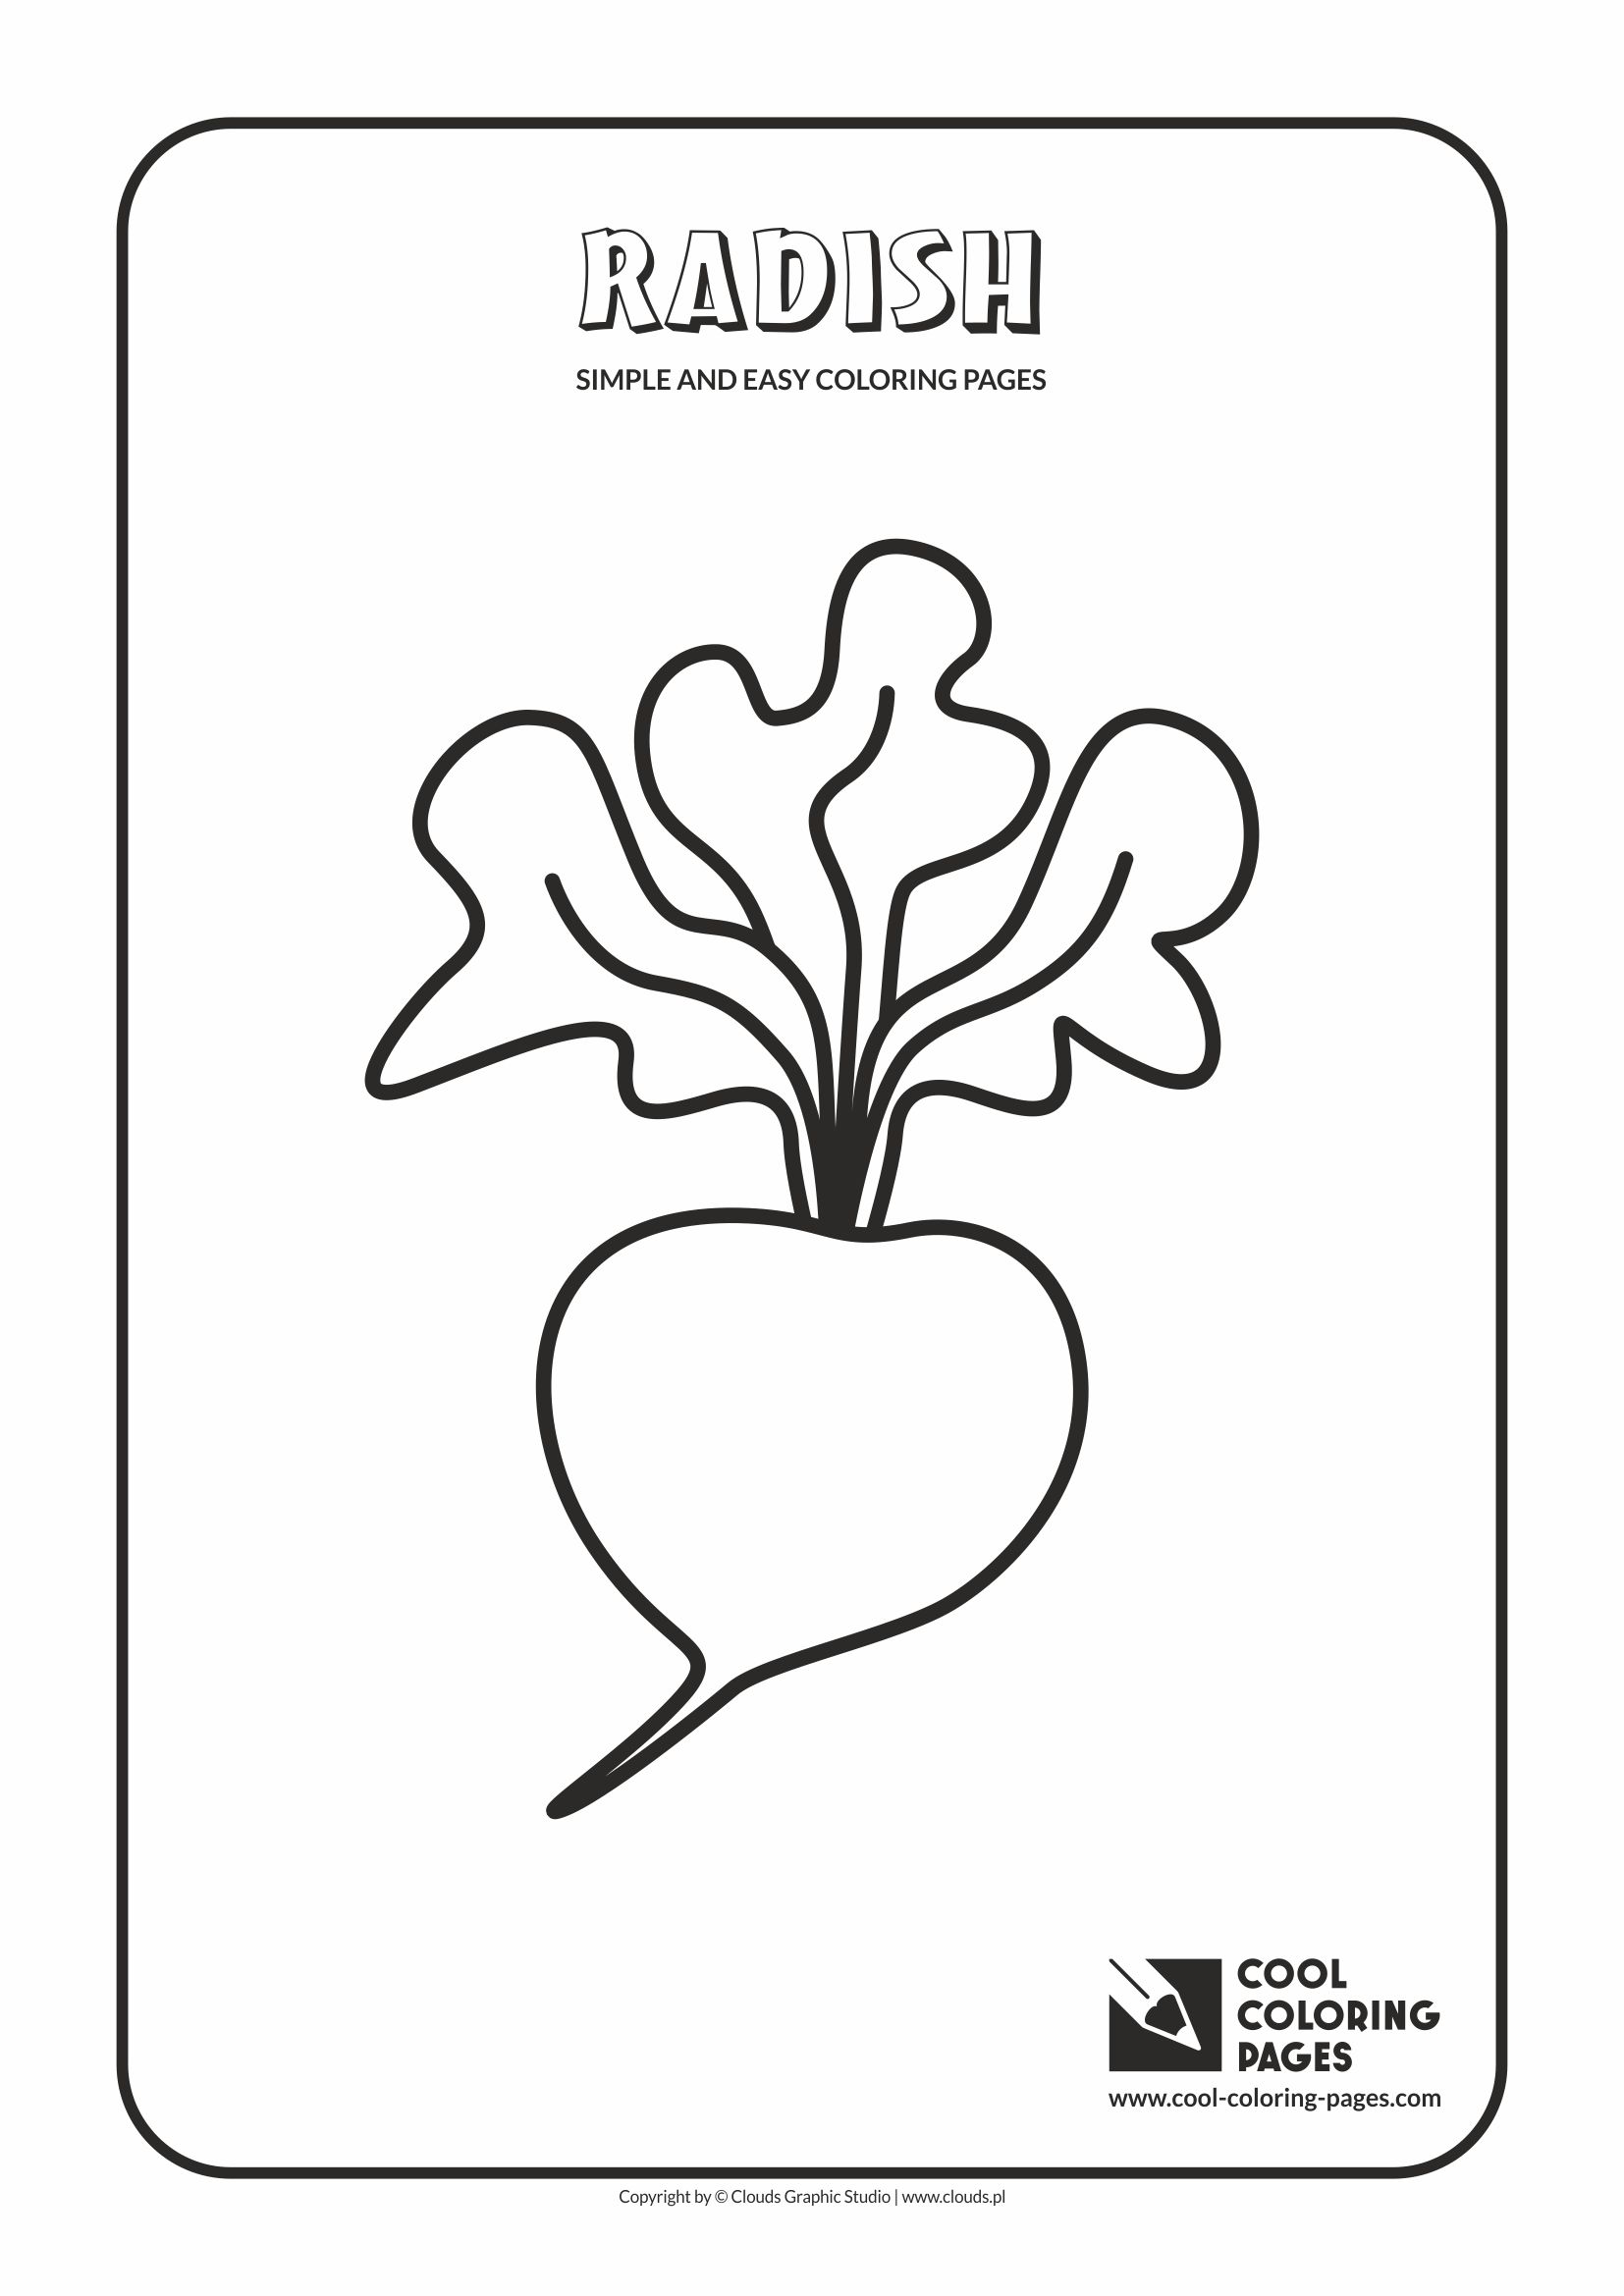 Simple and easy coloring pages for toddlers - Radish